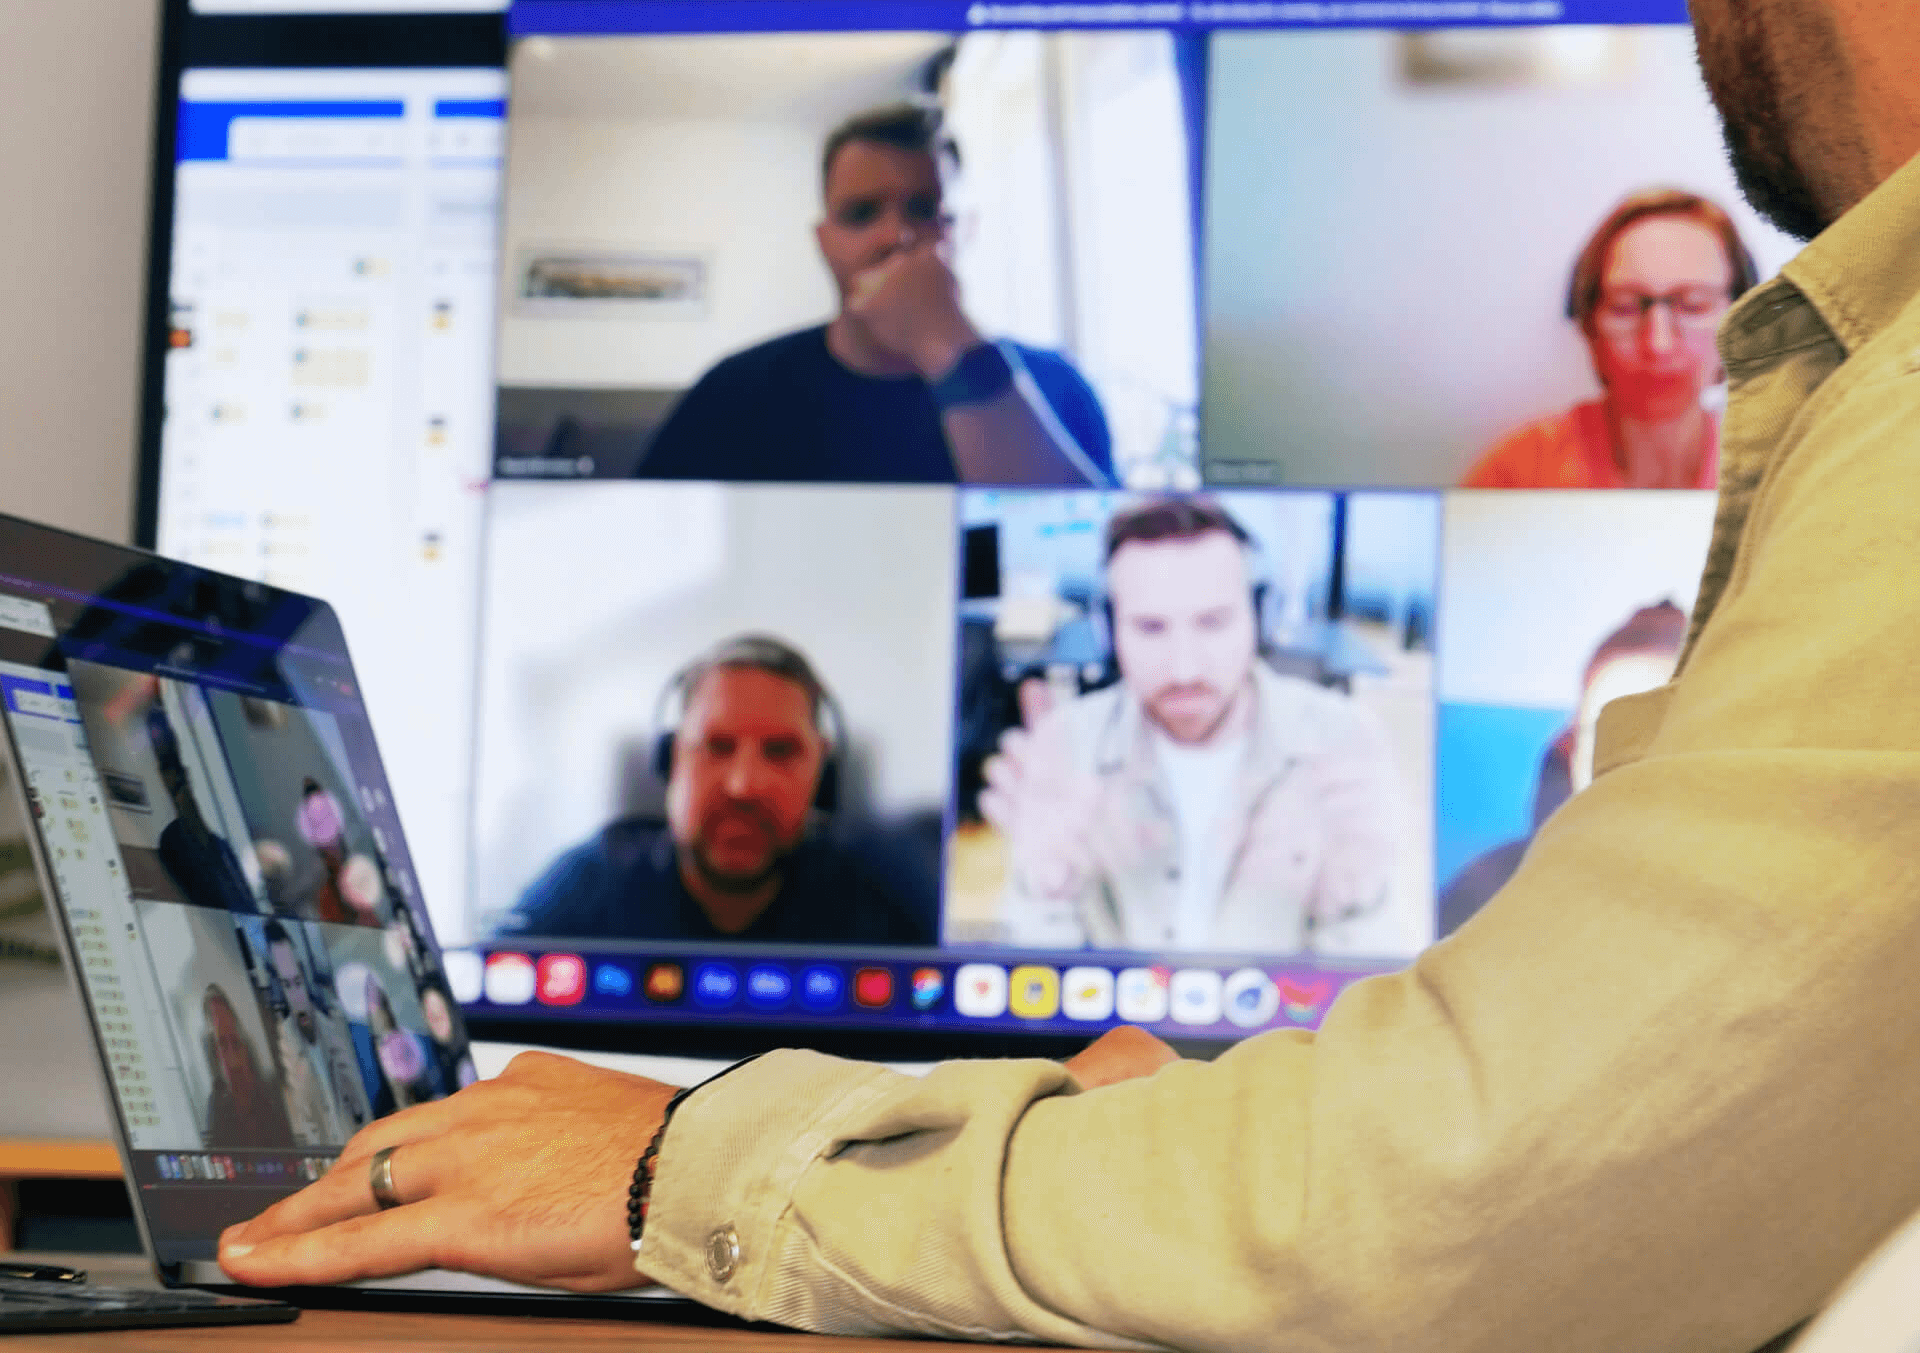 In the foreground a man is on his laptop. The screen behind him shows 5 participants on a product call.